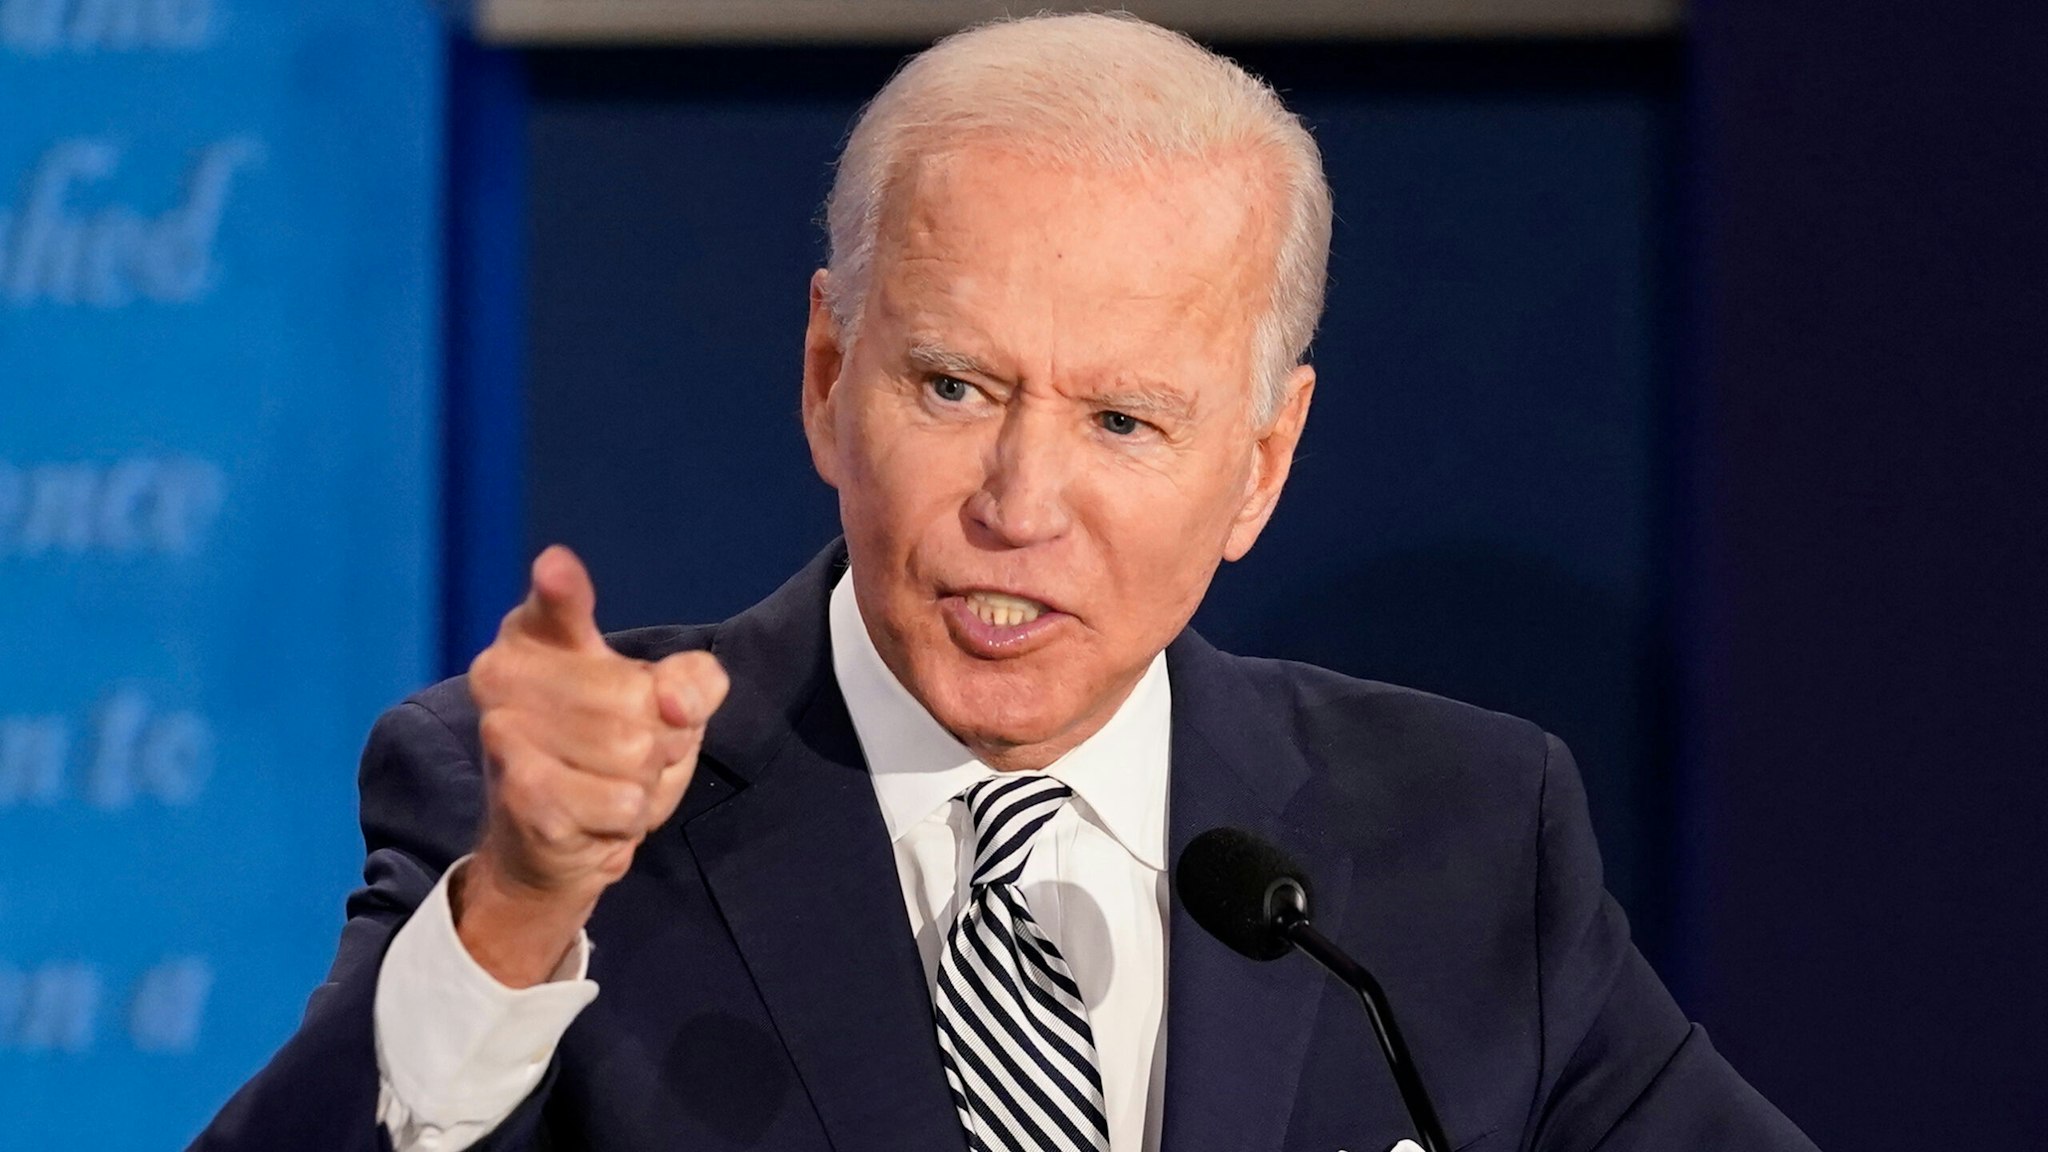 CLEVELAND, OHIO - SEPTEMBER 29: Democratic presidential nominee Joe Biden participates in the first presidential debate against U.S. President Donald Trump at the Health Education Campus of Case Western Reserve University on September 29, 2020 in Cleveland, Ohio. This is the first of three planned debates between the two candidates in the lead up to the election on November 3.